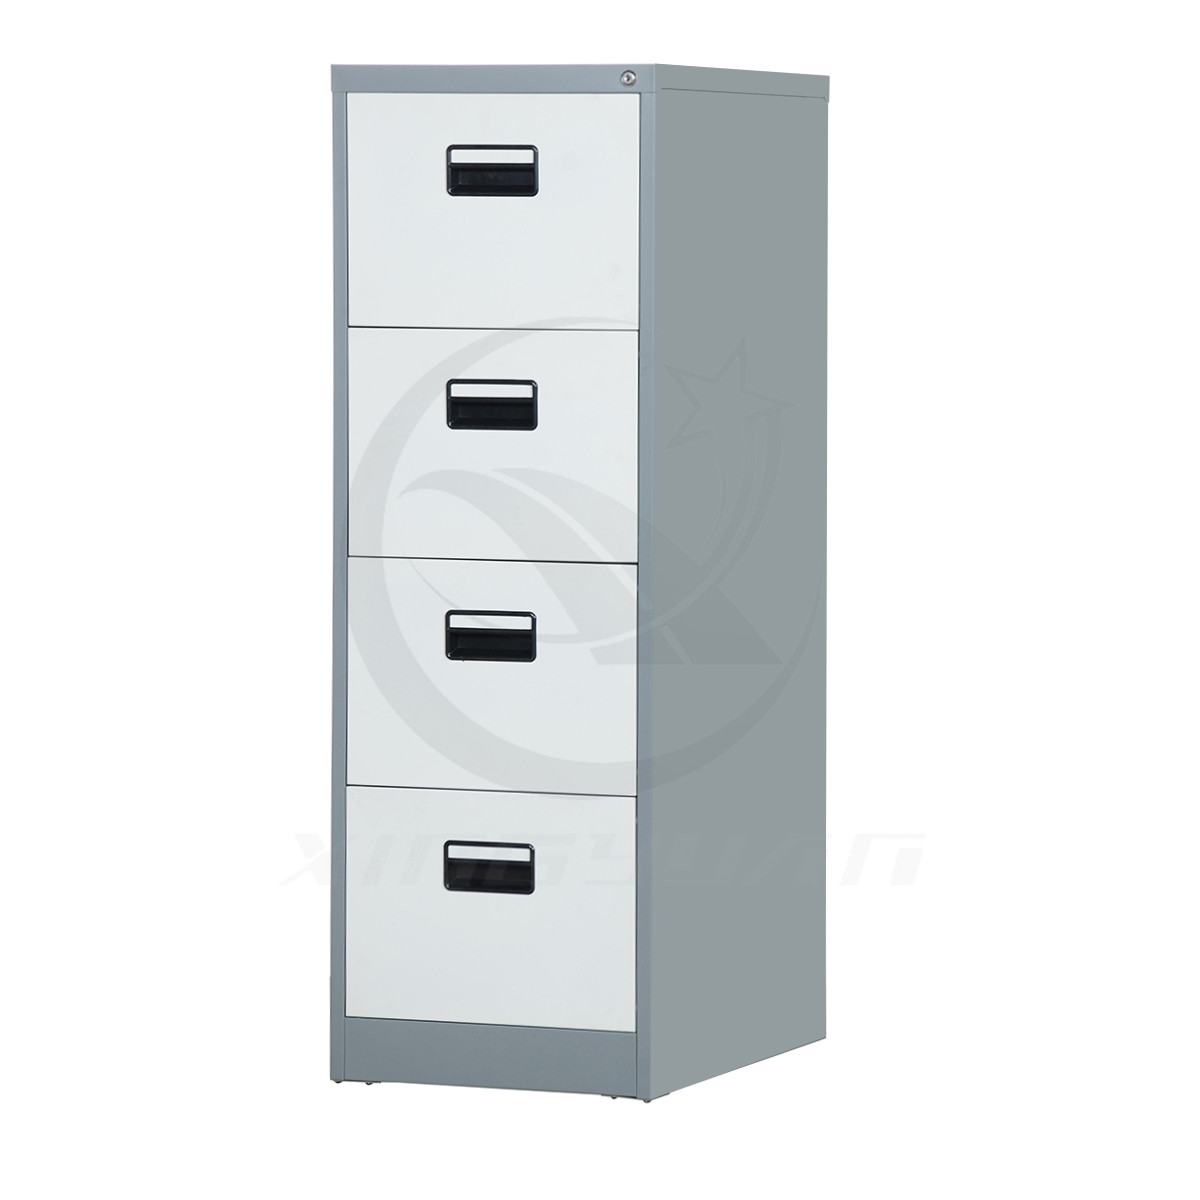 Emily Office Staff Used 4 Drawer Metal File Cabinet